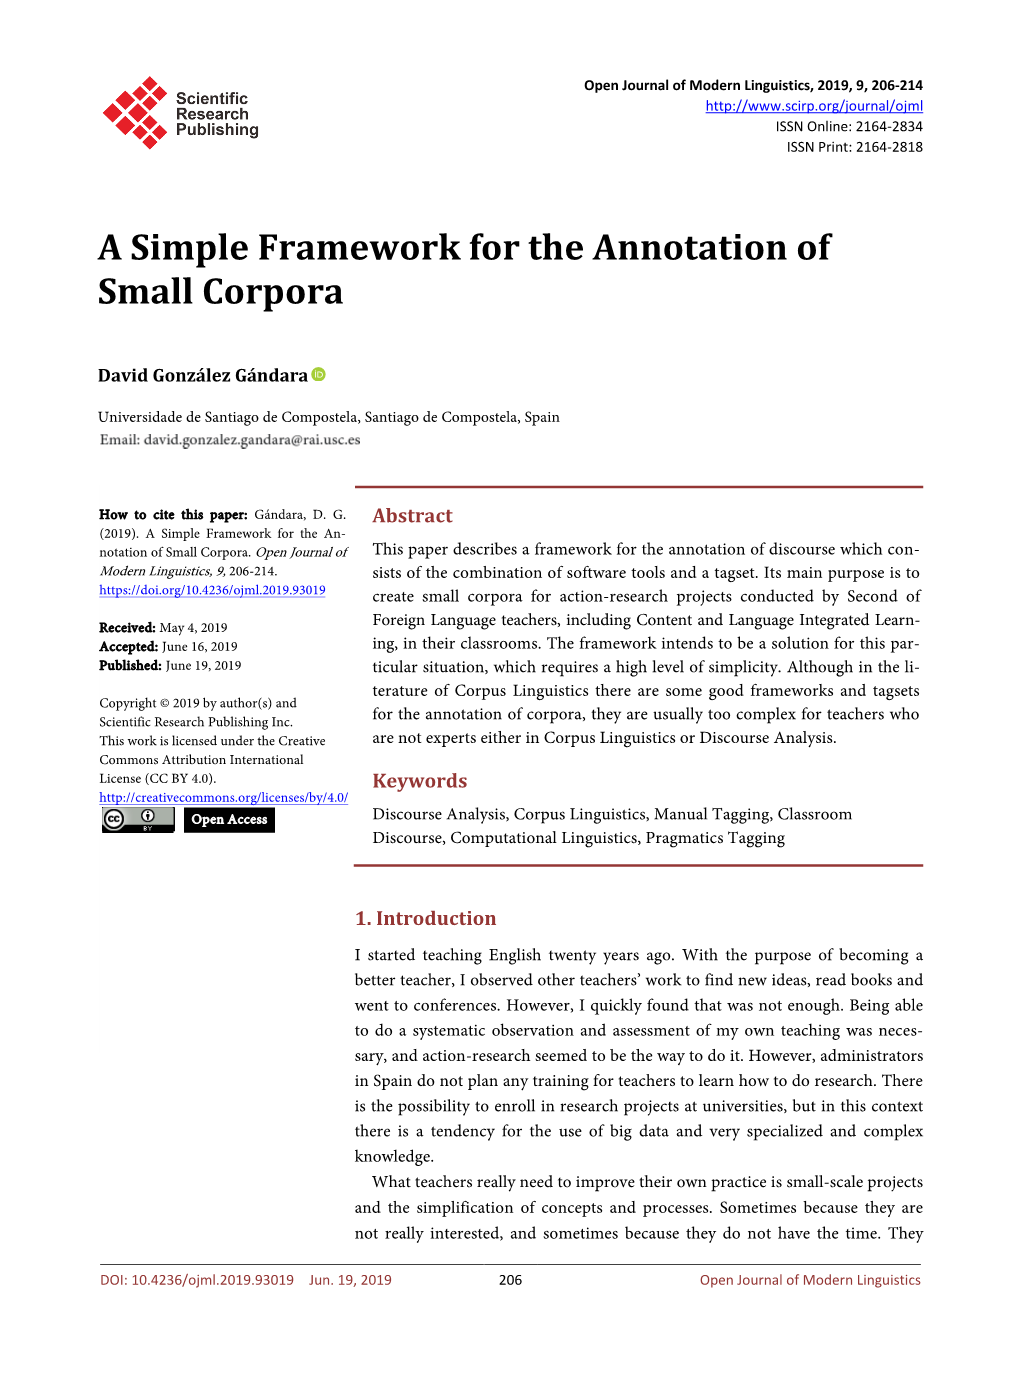 A Simple Framework for the Annotation of Small Corpora